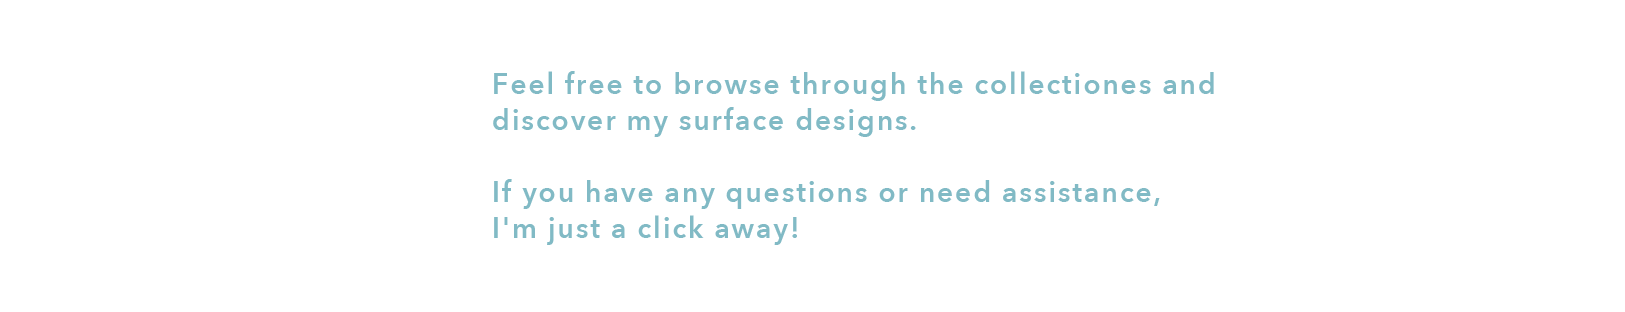 Feel free to browse through the collectiones and  discover my surface designs.   If you have any questions or need assistance,  I'm just a click away!